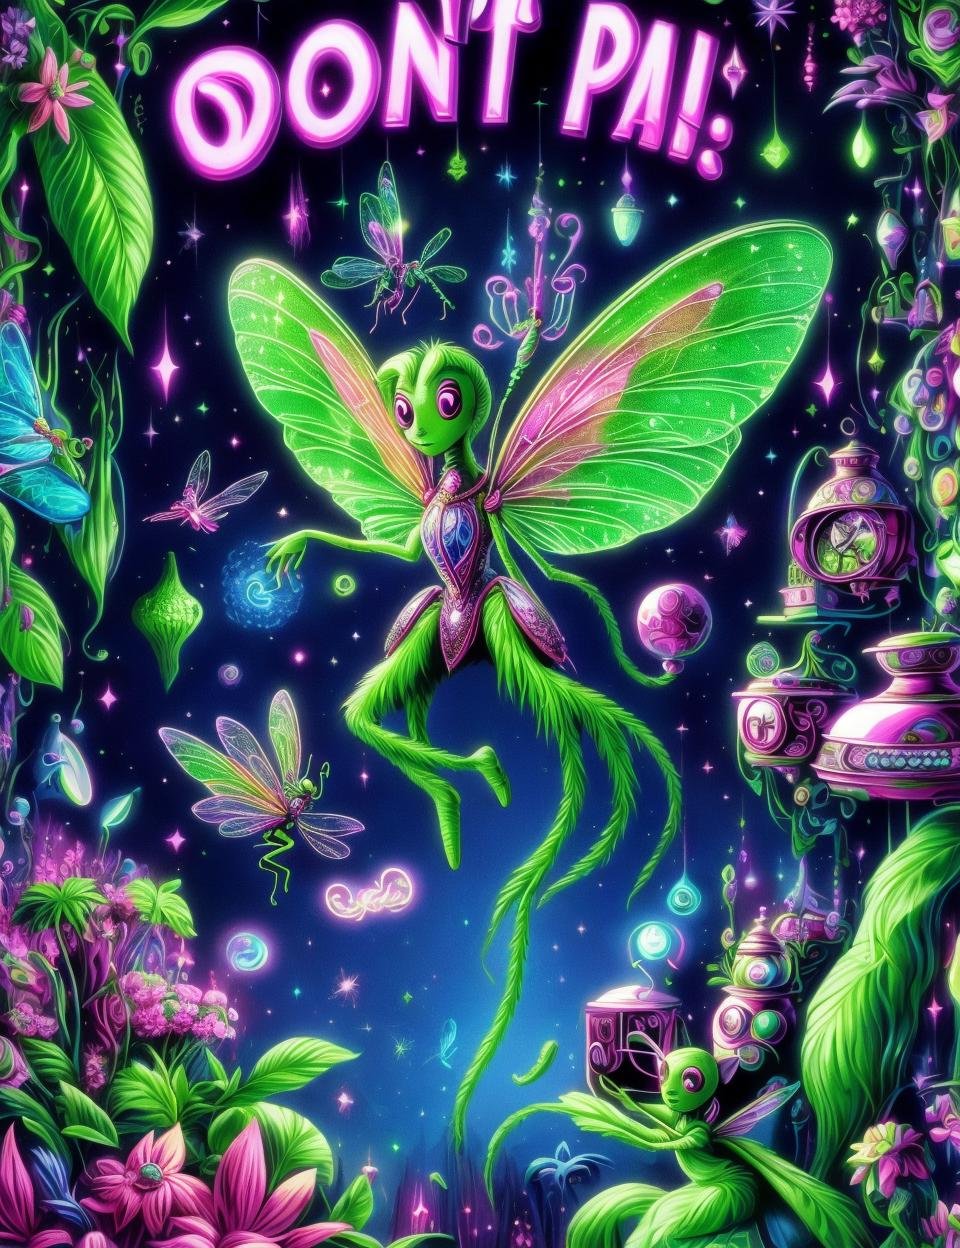 DonMD0n7P4n1c, text "DON'T PANIC!",  aziza, Benevolent fairy-like being, small and elusive, helpful,  forests and nature, wisdom, magical abilities, dragonfly wings,, symbolize harmony with nature, open kitchen,music and dance,eerie,vaporizing ,    <lora:DonMD0n7P4n1c:1>